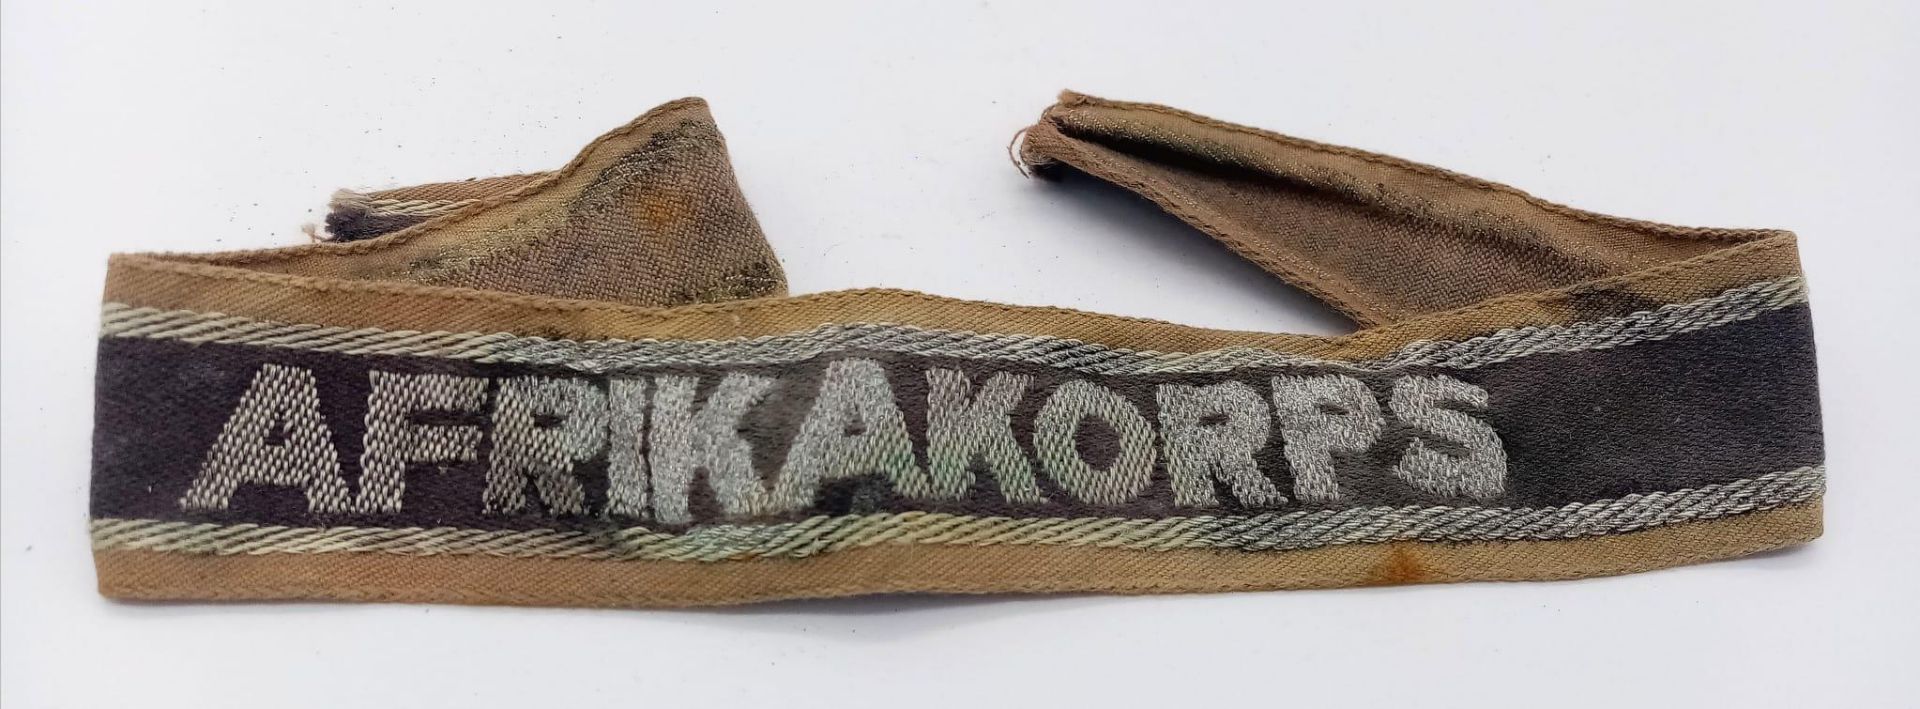 WW2 Africa Corps Cuff Title. Reputed to of been a veteran bring back.